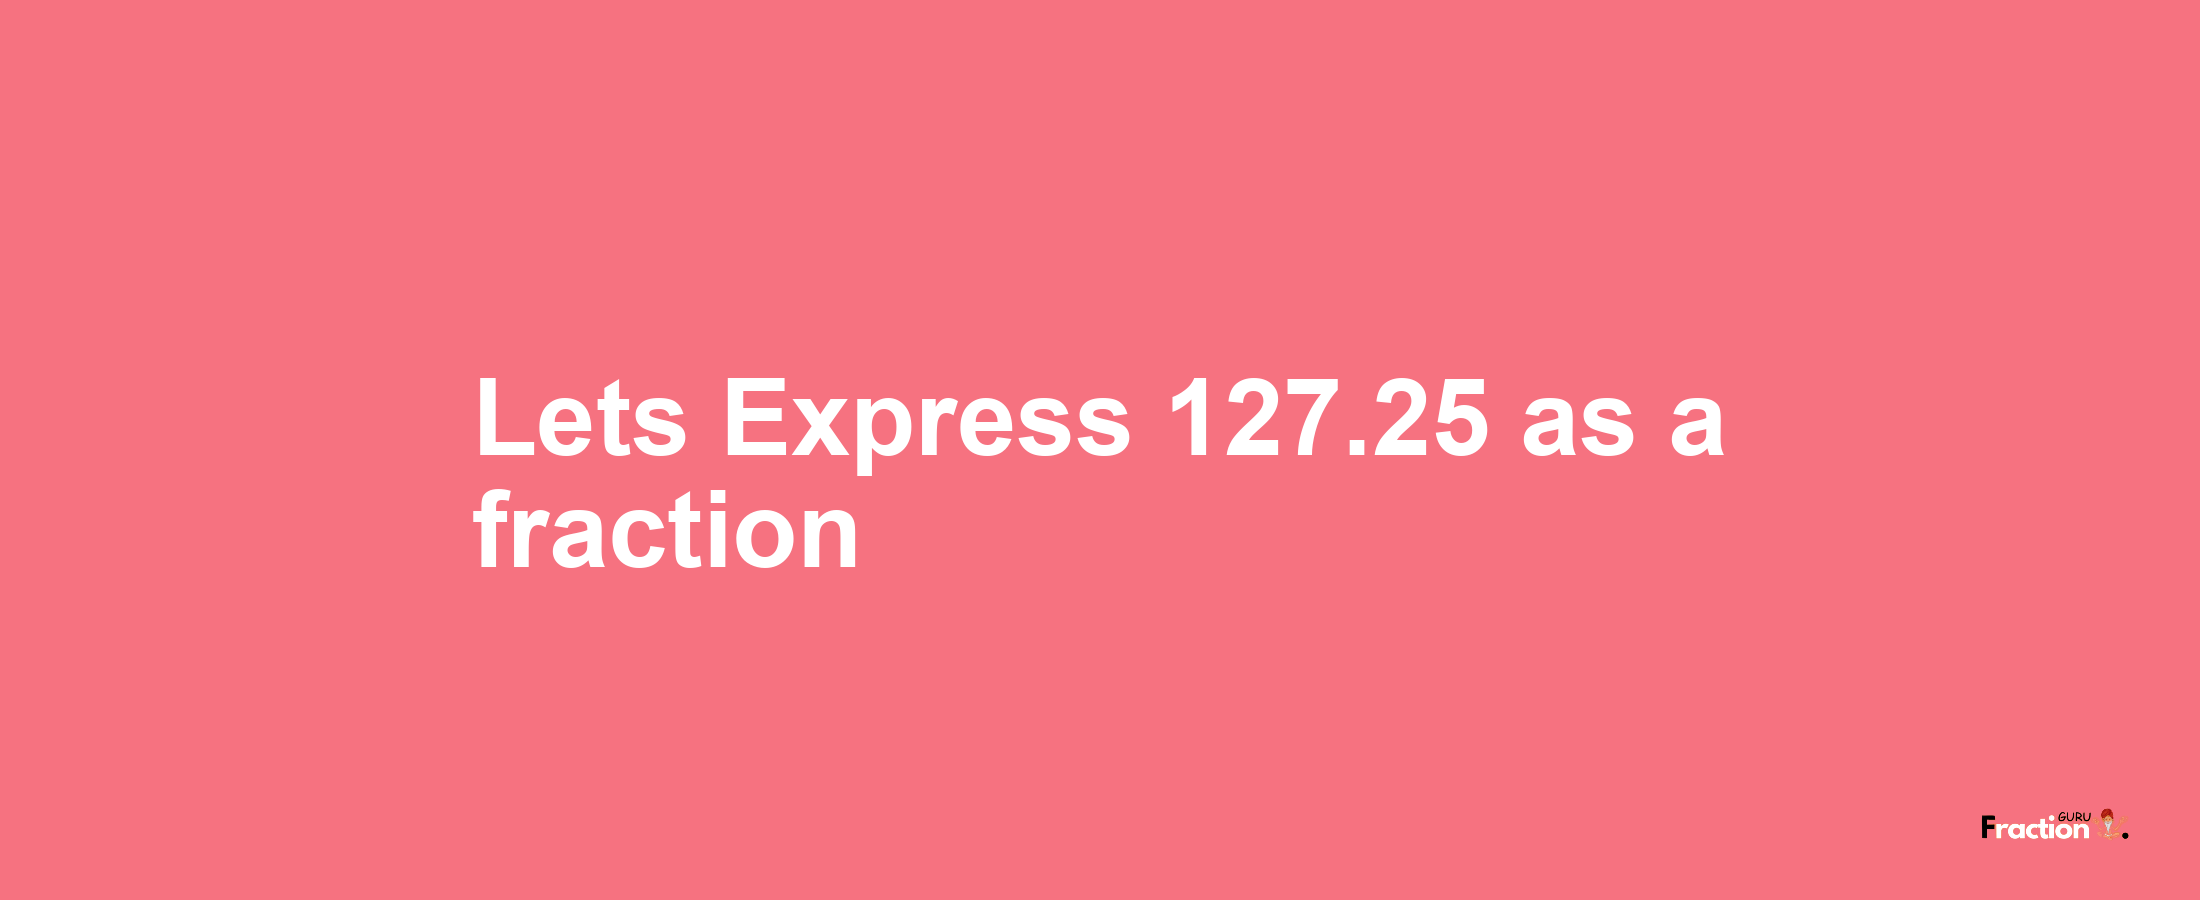 Lets Express 127.25 as afraction